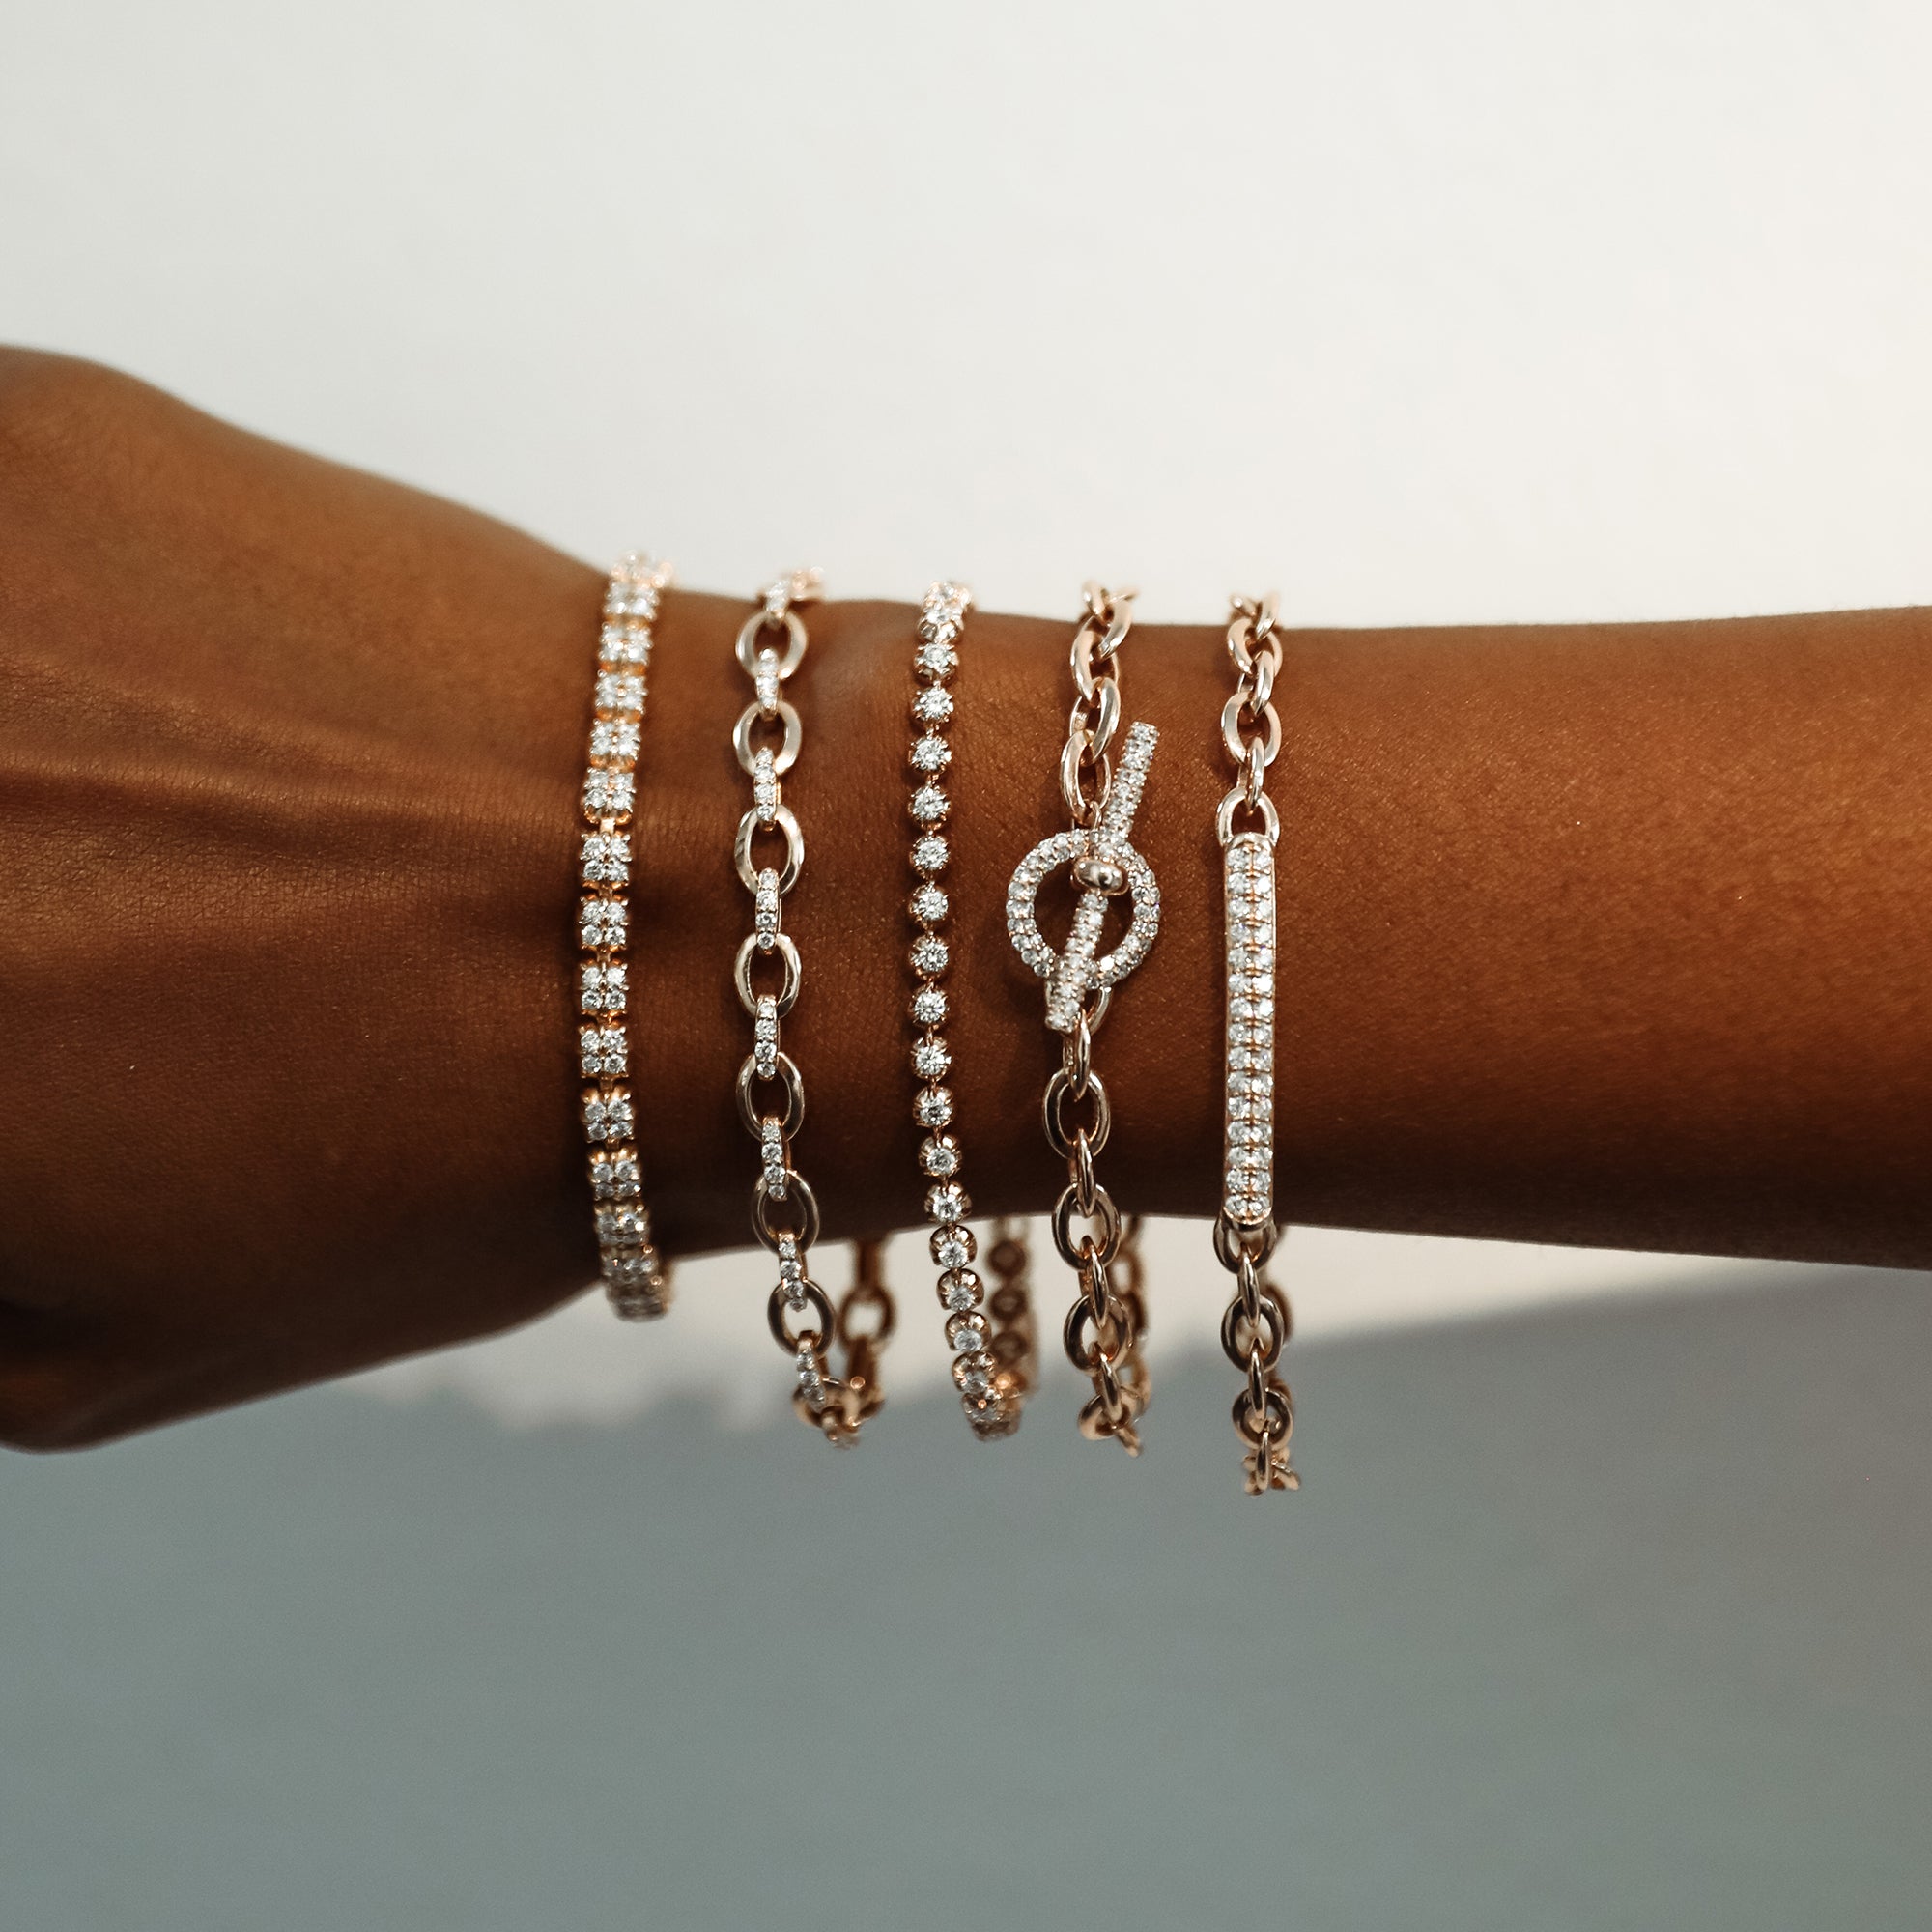 The Oval Link Bracelet shown stacked with the Trilogy Bracelet, Rosette Bracelet, Big Link Bracelet, and Mini Pantheon Bracelet. 